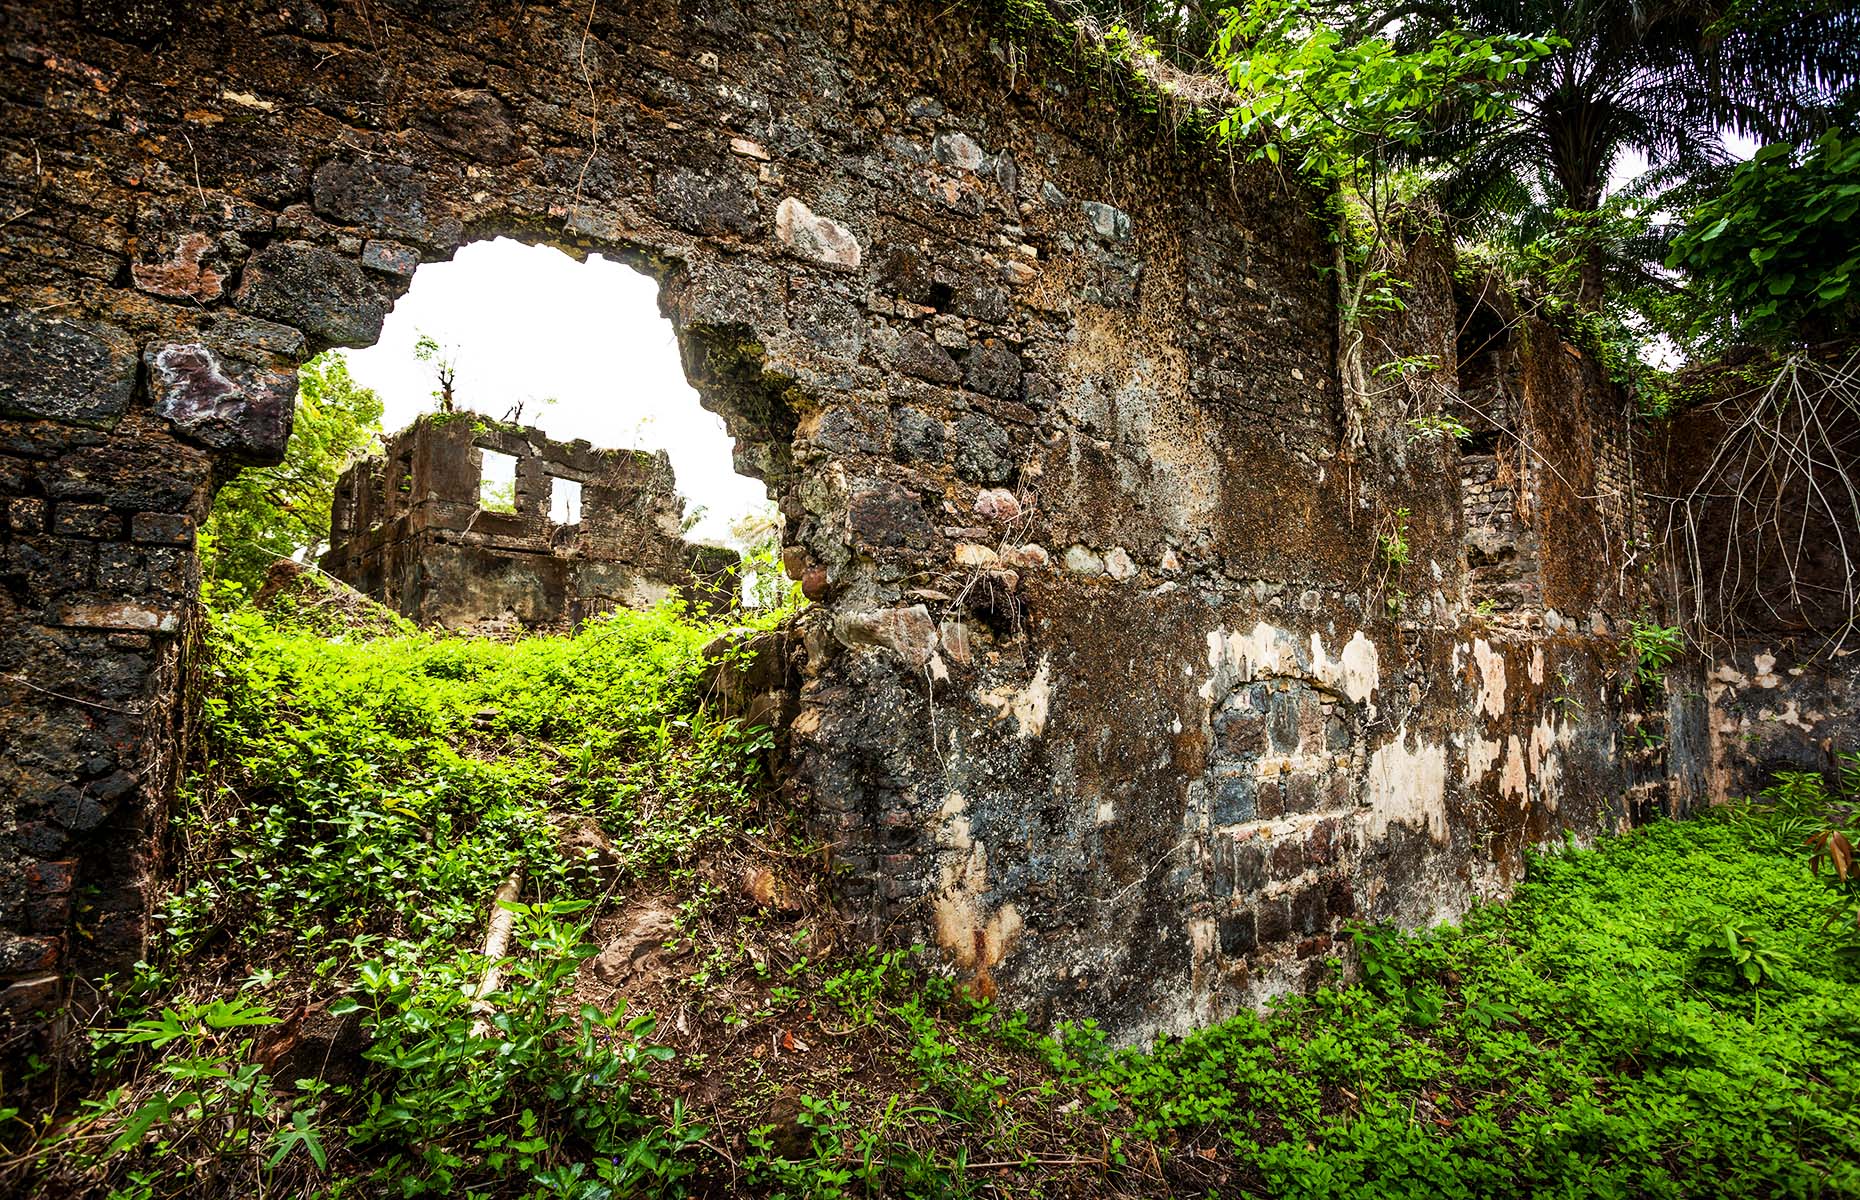 Ruins of the old slave fort on Bunce Island (robertonencini/Shutterstock)